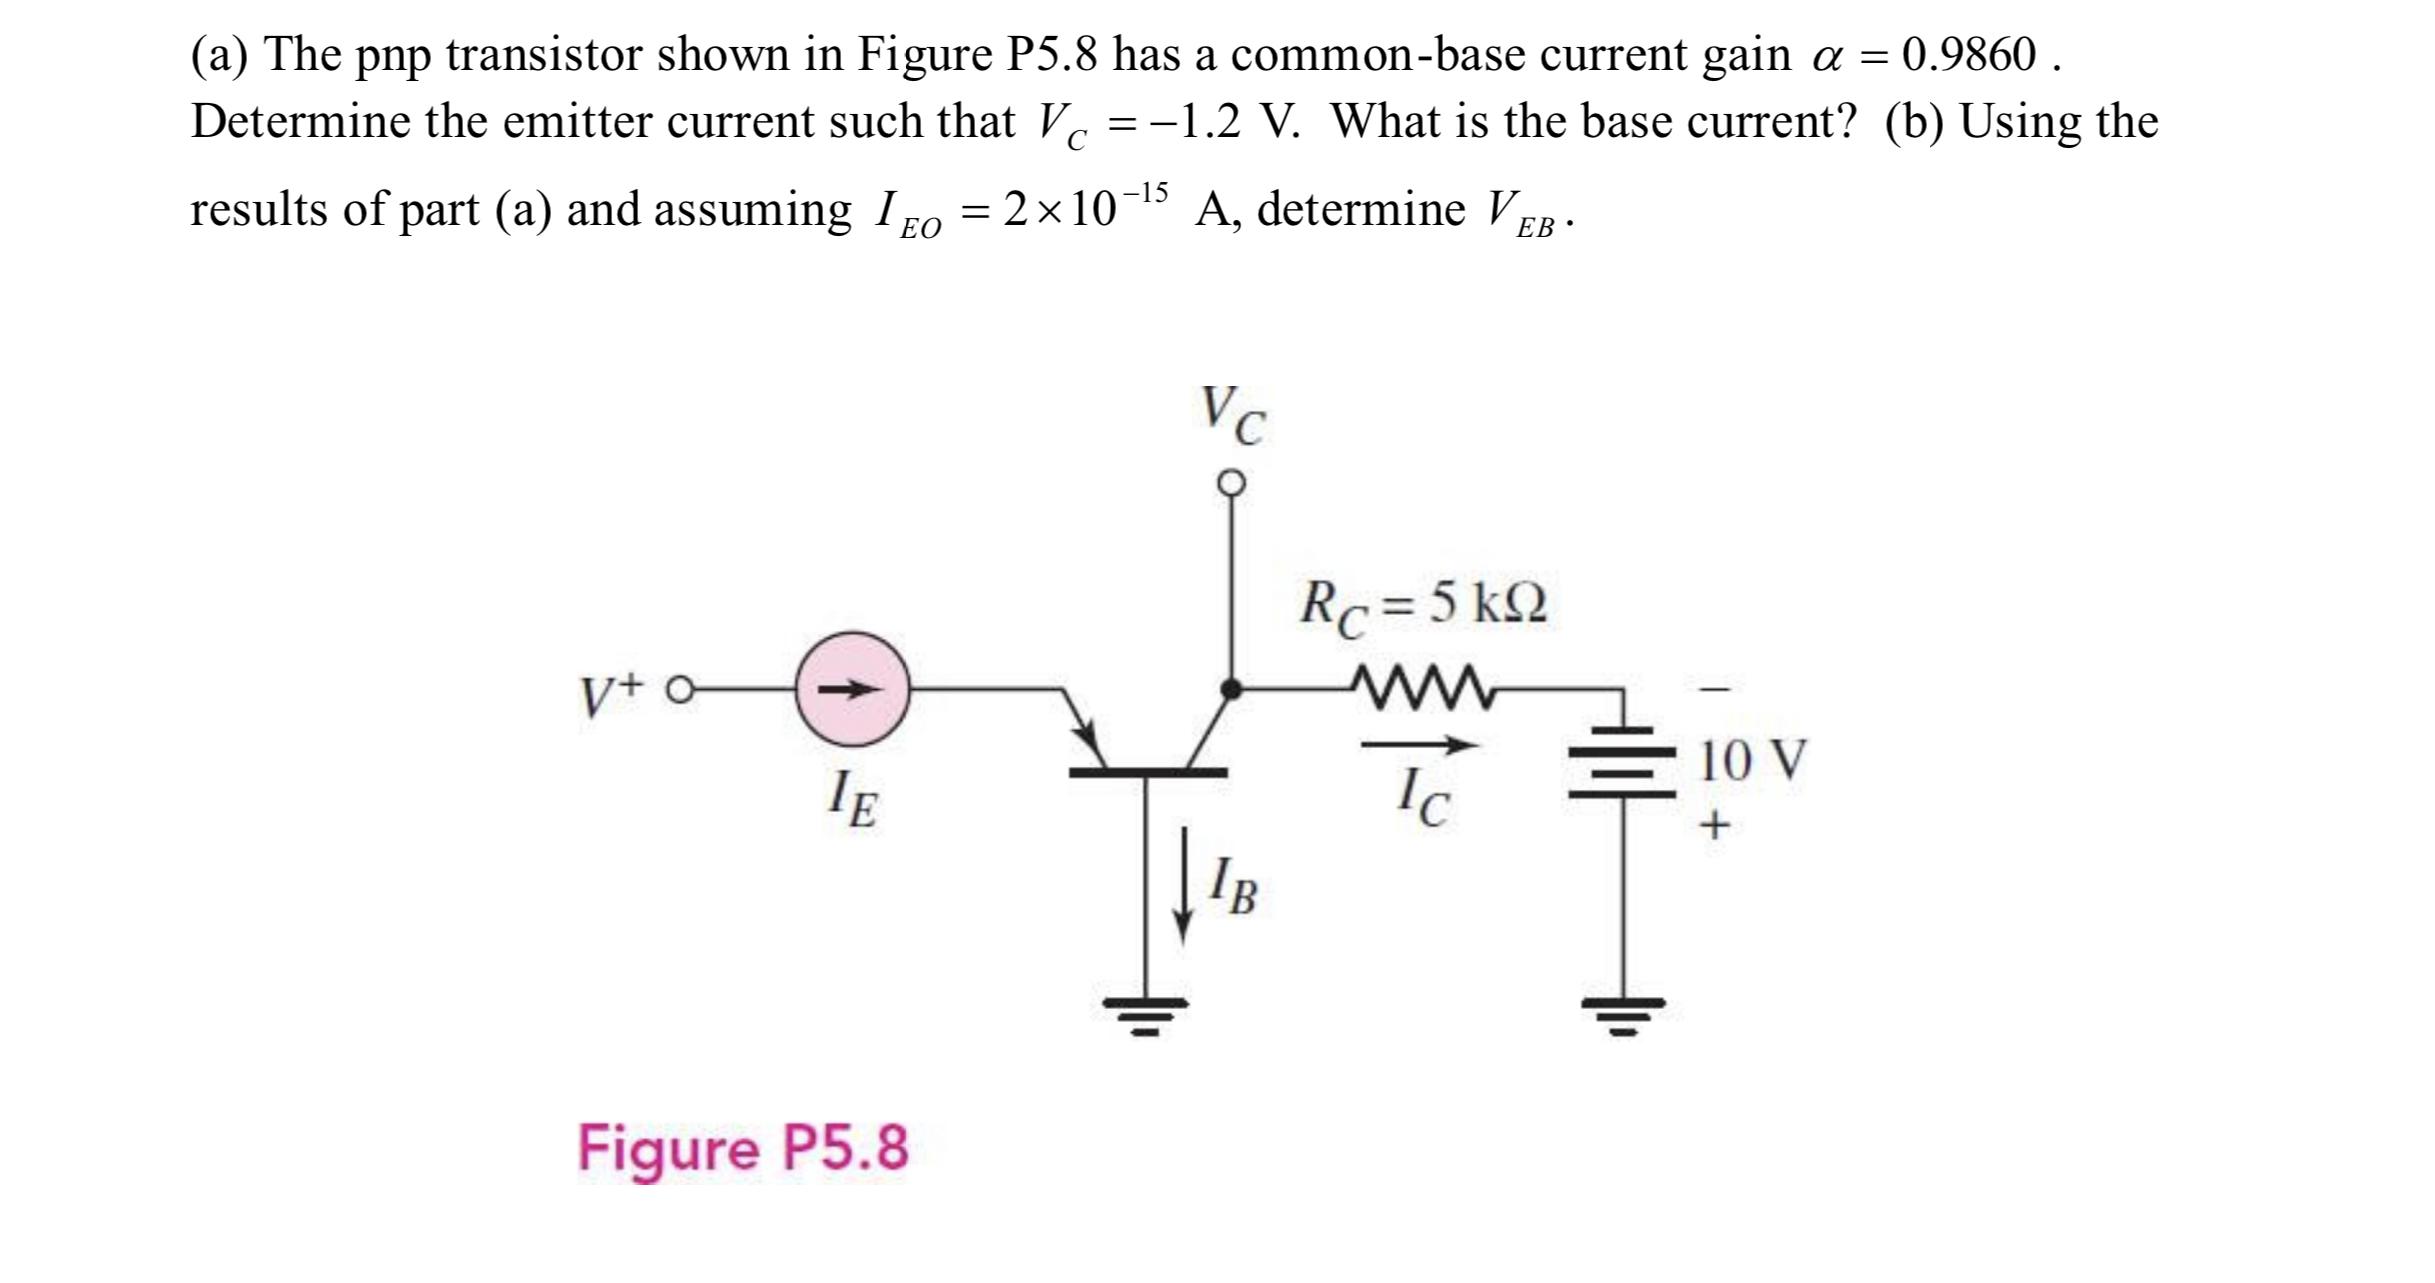 (a) The pnp transistor shown in Figure P5.8 has a common-base current gain a = 0.9860. Determine the emitter